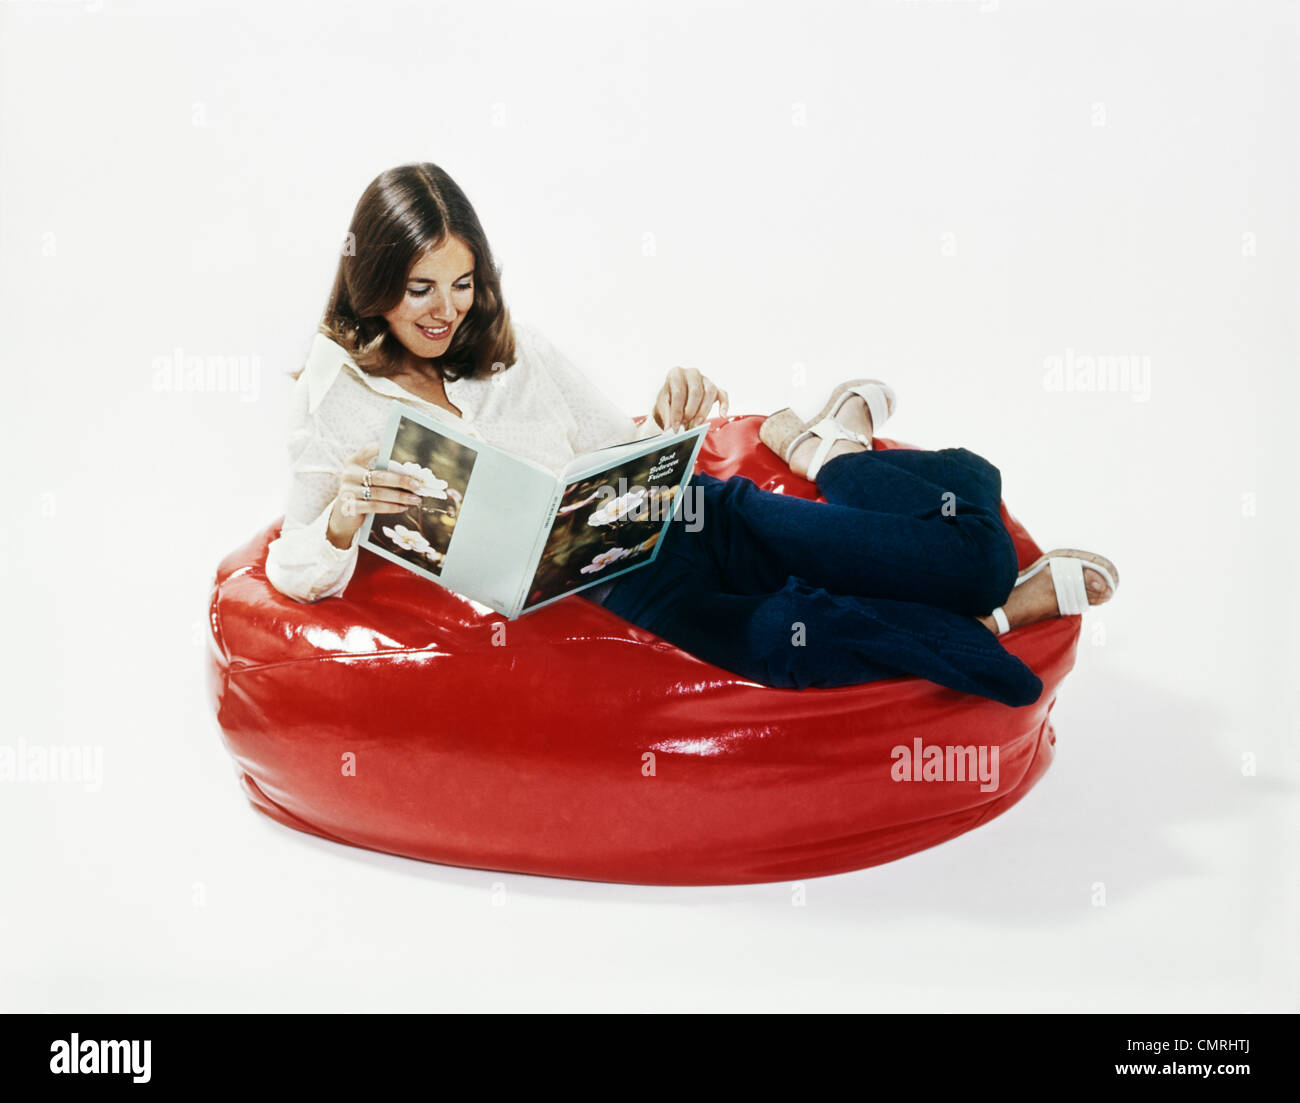 1960s 1970s WOMAN SMILING READING BOOK RECLINING IN A RED BEANBAG CHAIR Stock Photo